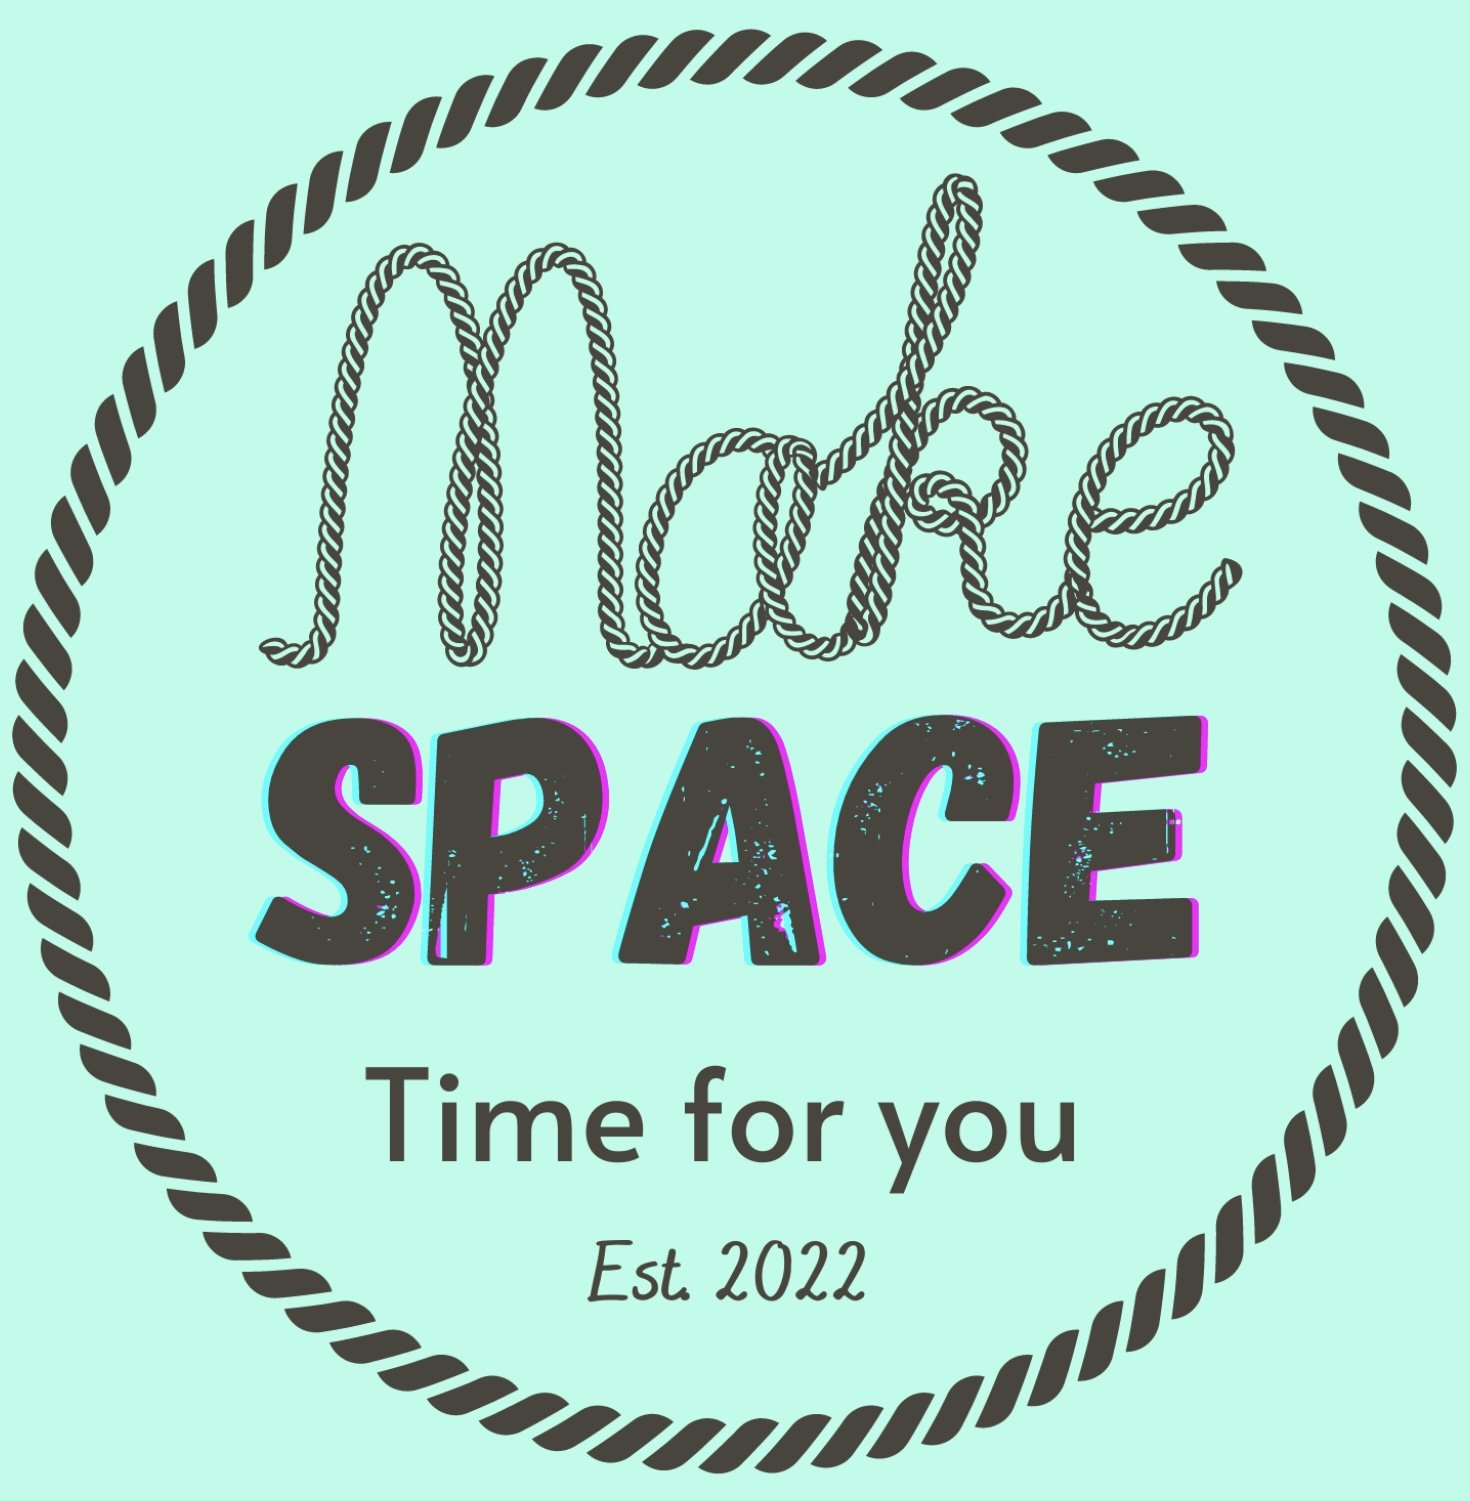 Make Space Chelmsford